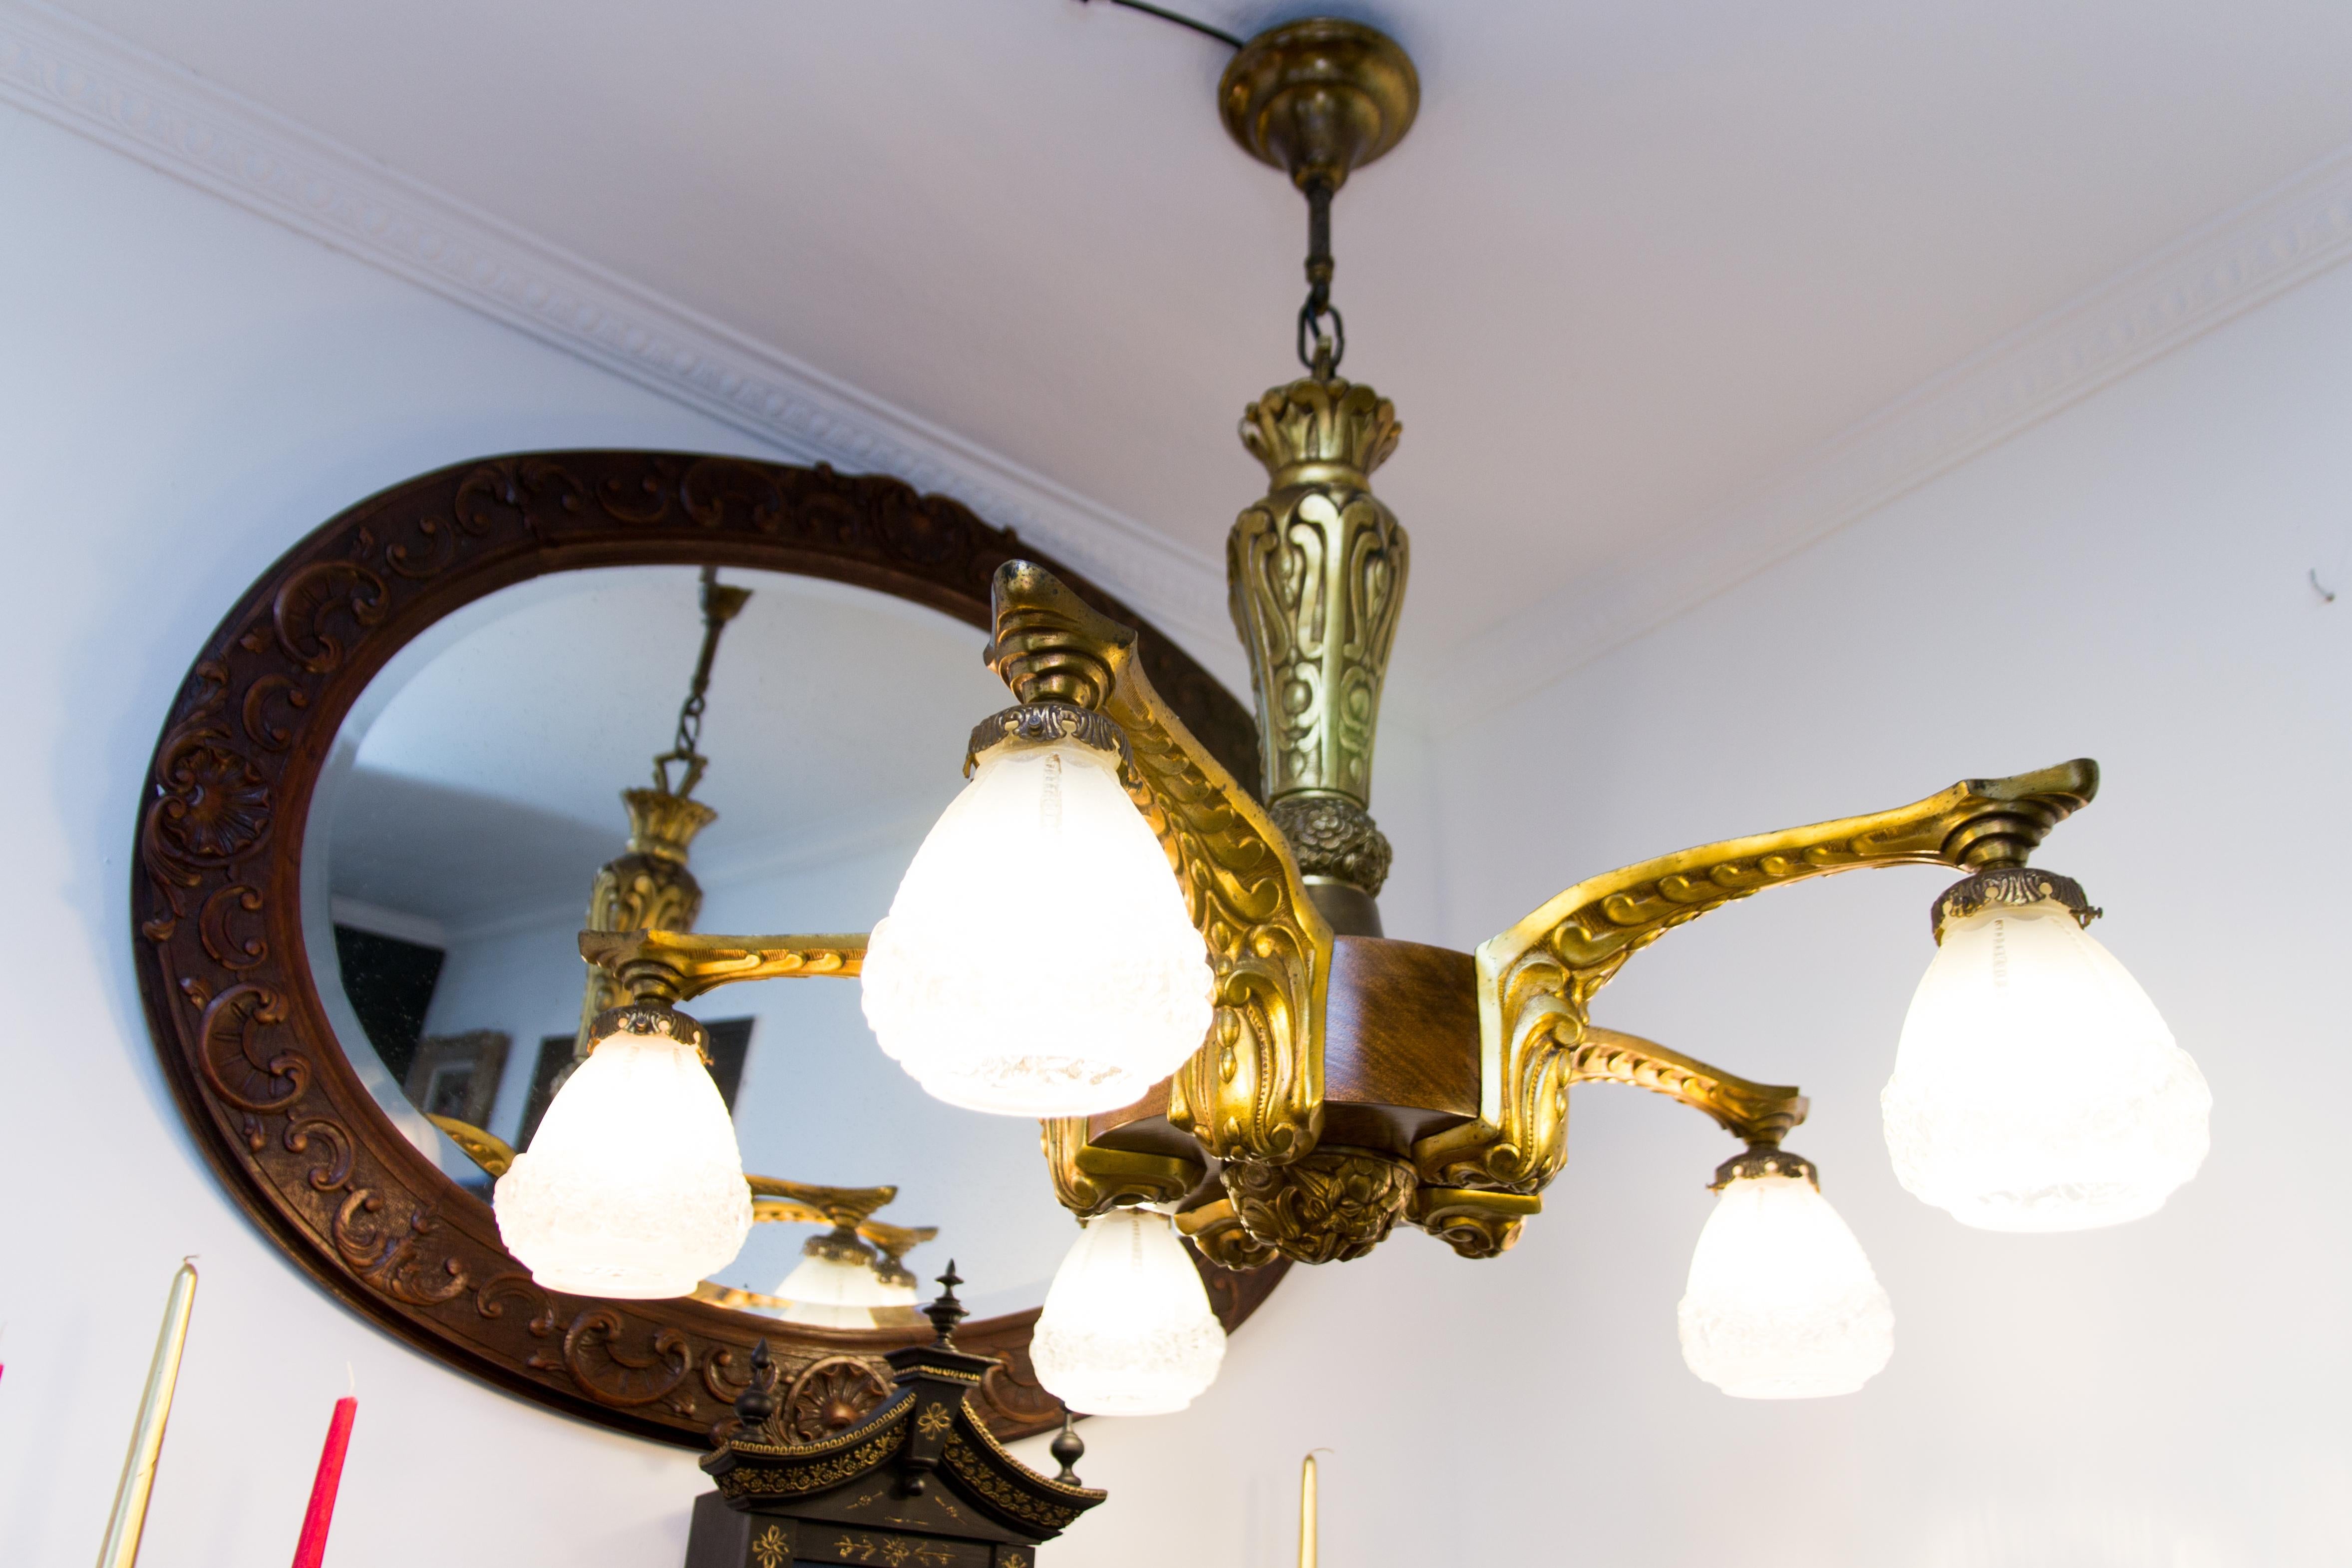 French Art Deco gilt bronze and ashwood chandelier from 1910s. Five bronze arms, each with a frosted floral glass lamp shade and original E27 socket with new wiring.
Bronze parts are decorated with floral motifs.
Measures: Total height is 34.3